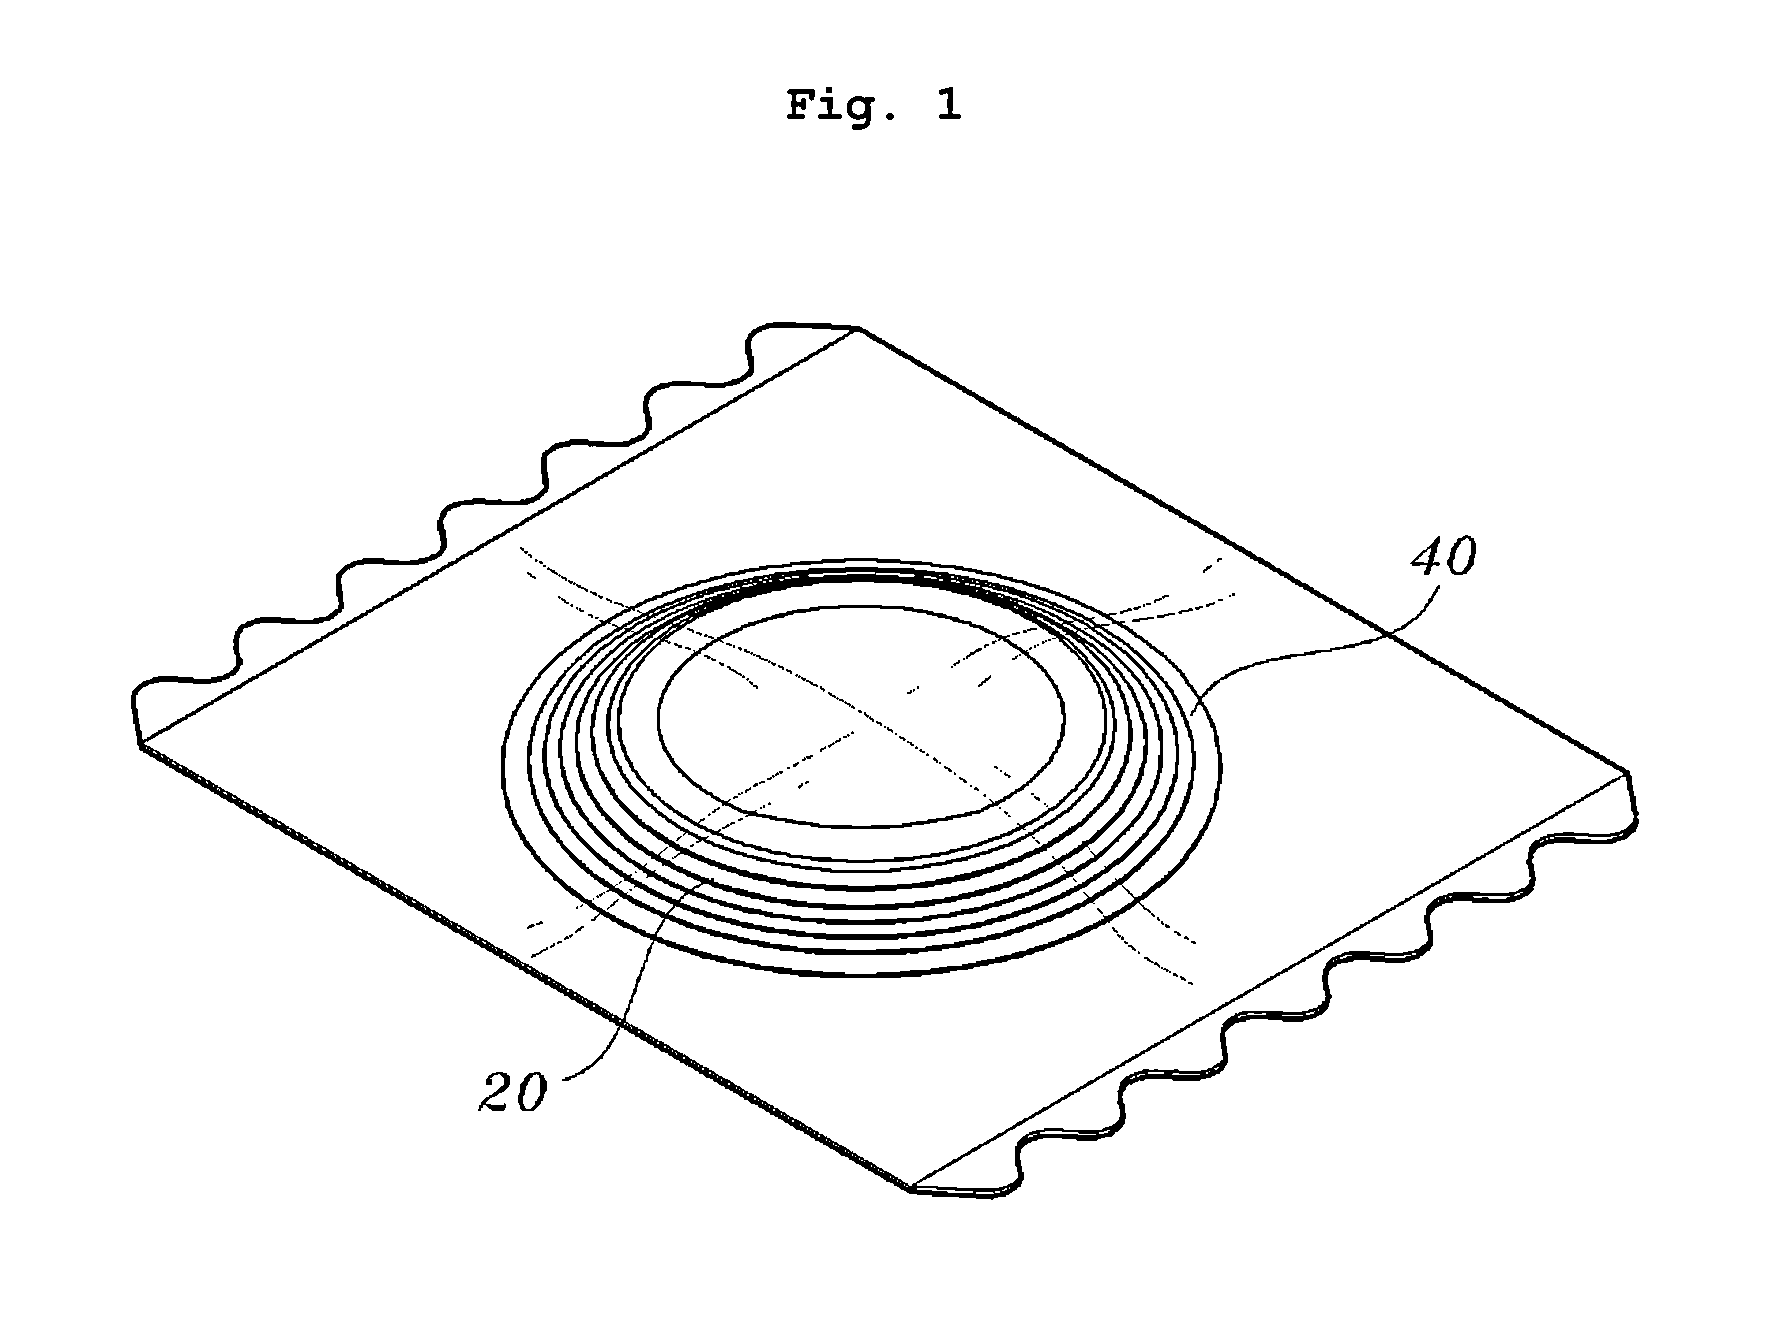 Disposable sterilized cupping therapy apparatus